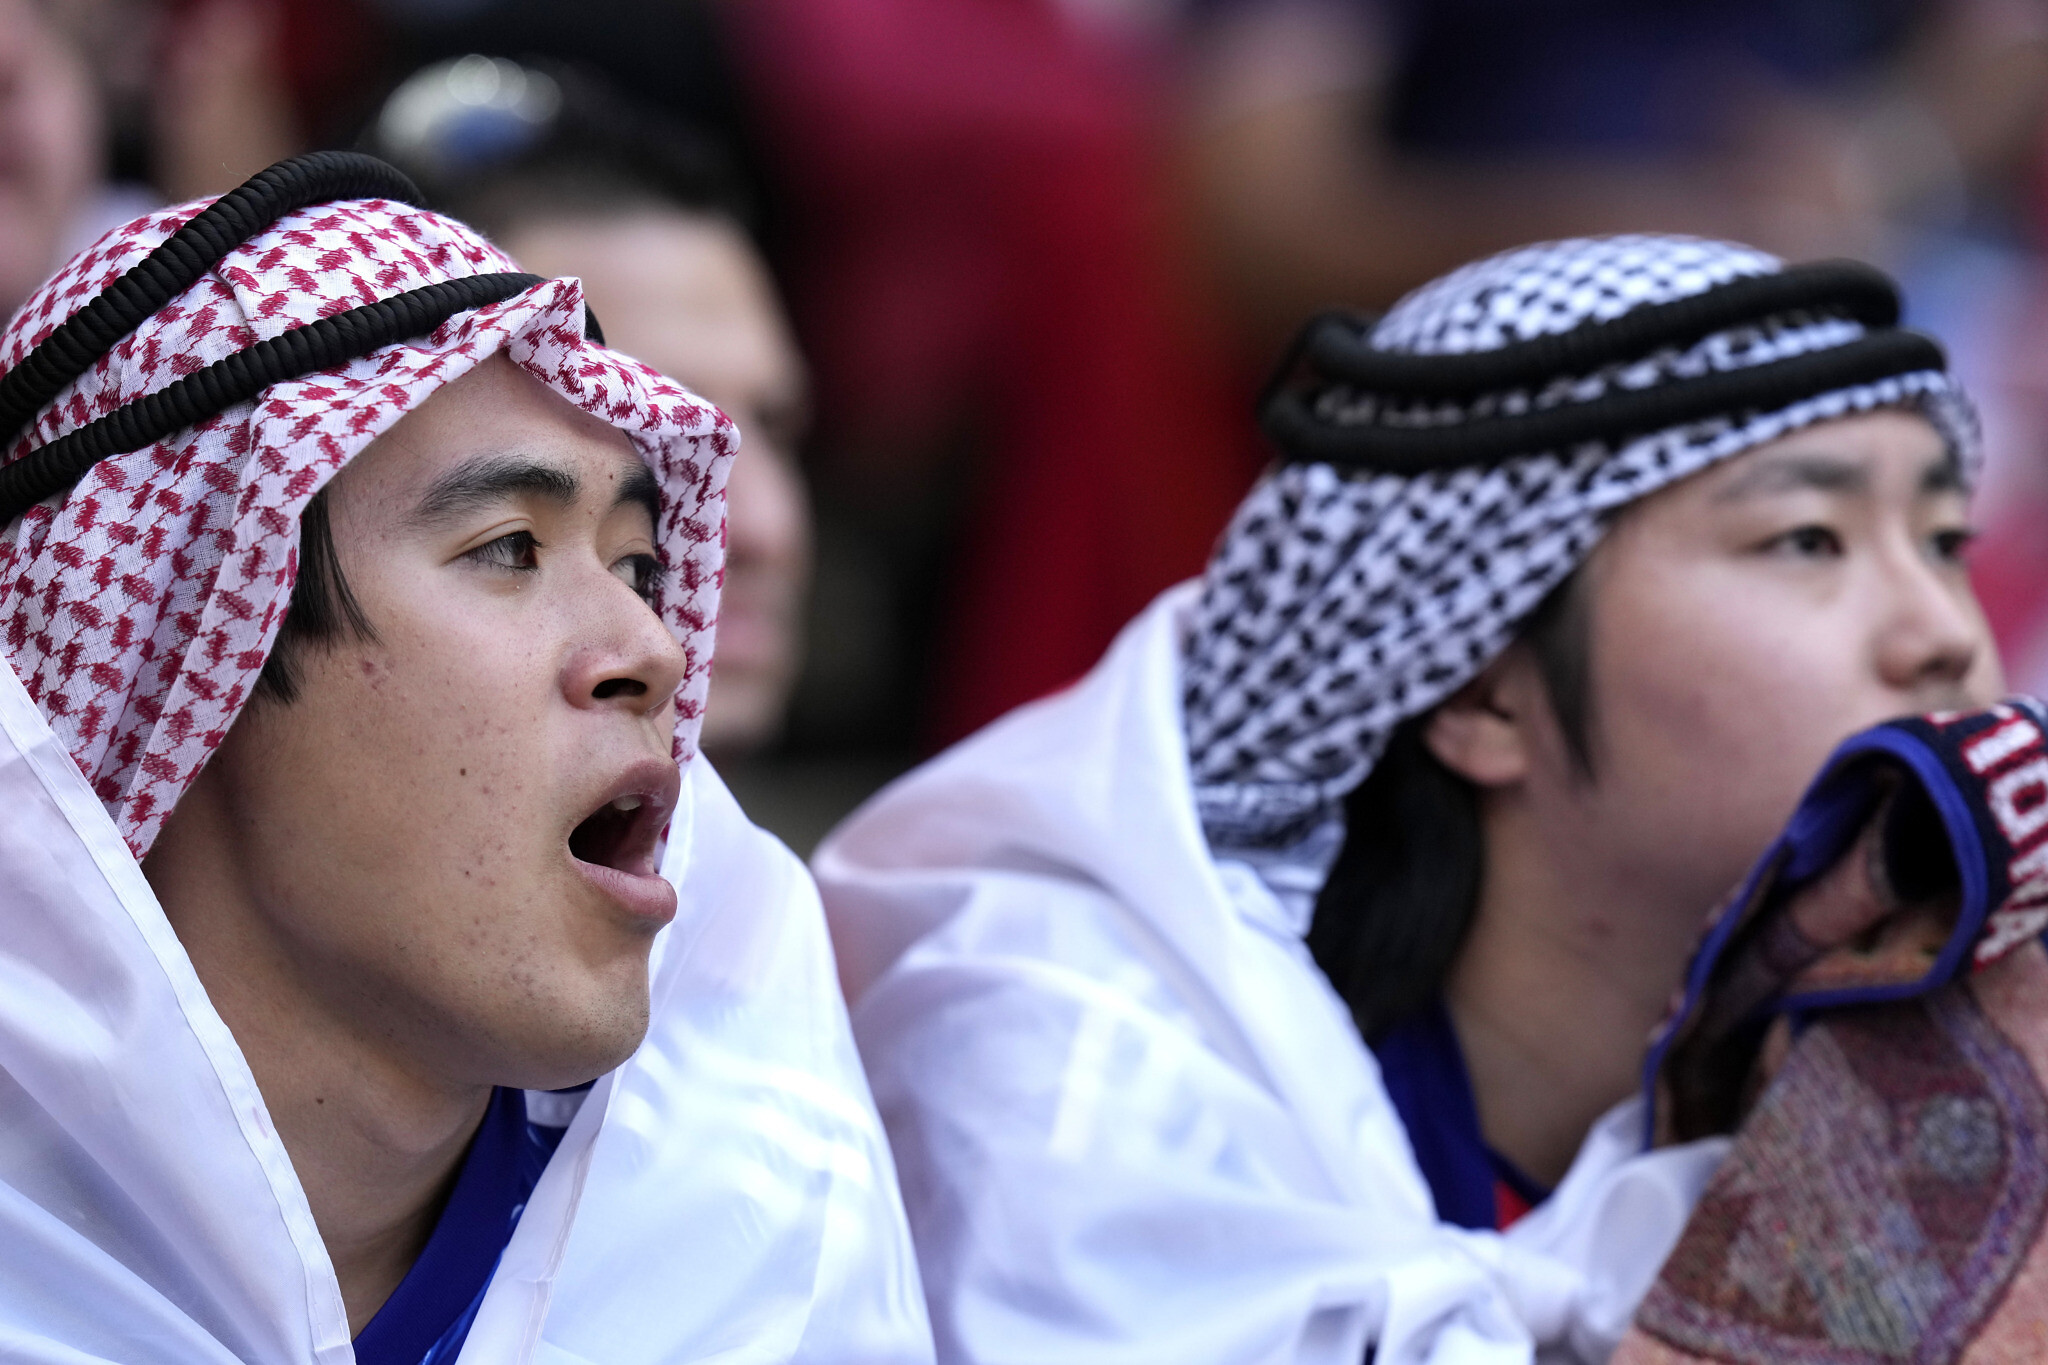 South Korea's luck runs out at World Cup as Brazil exposes gulf in